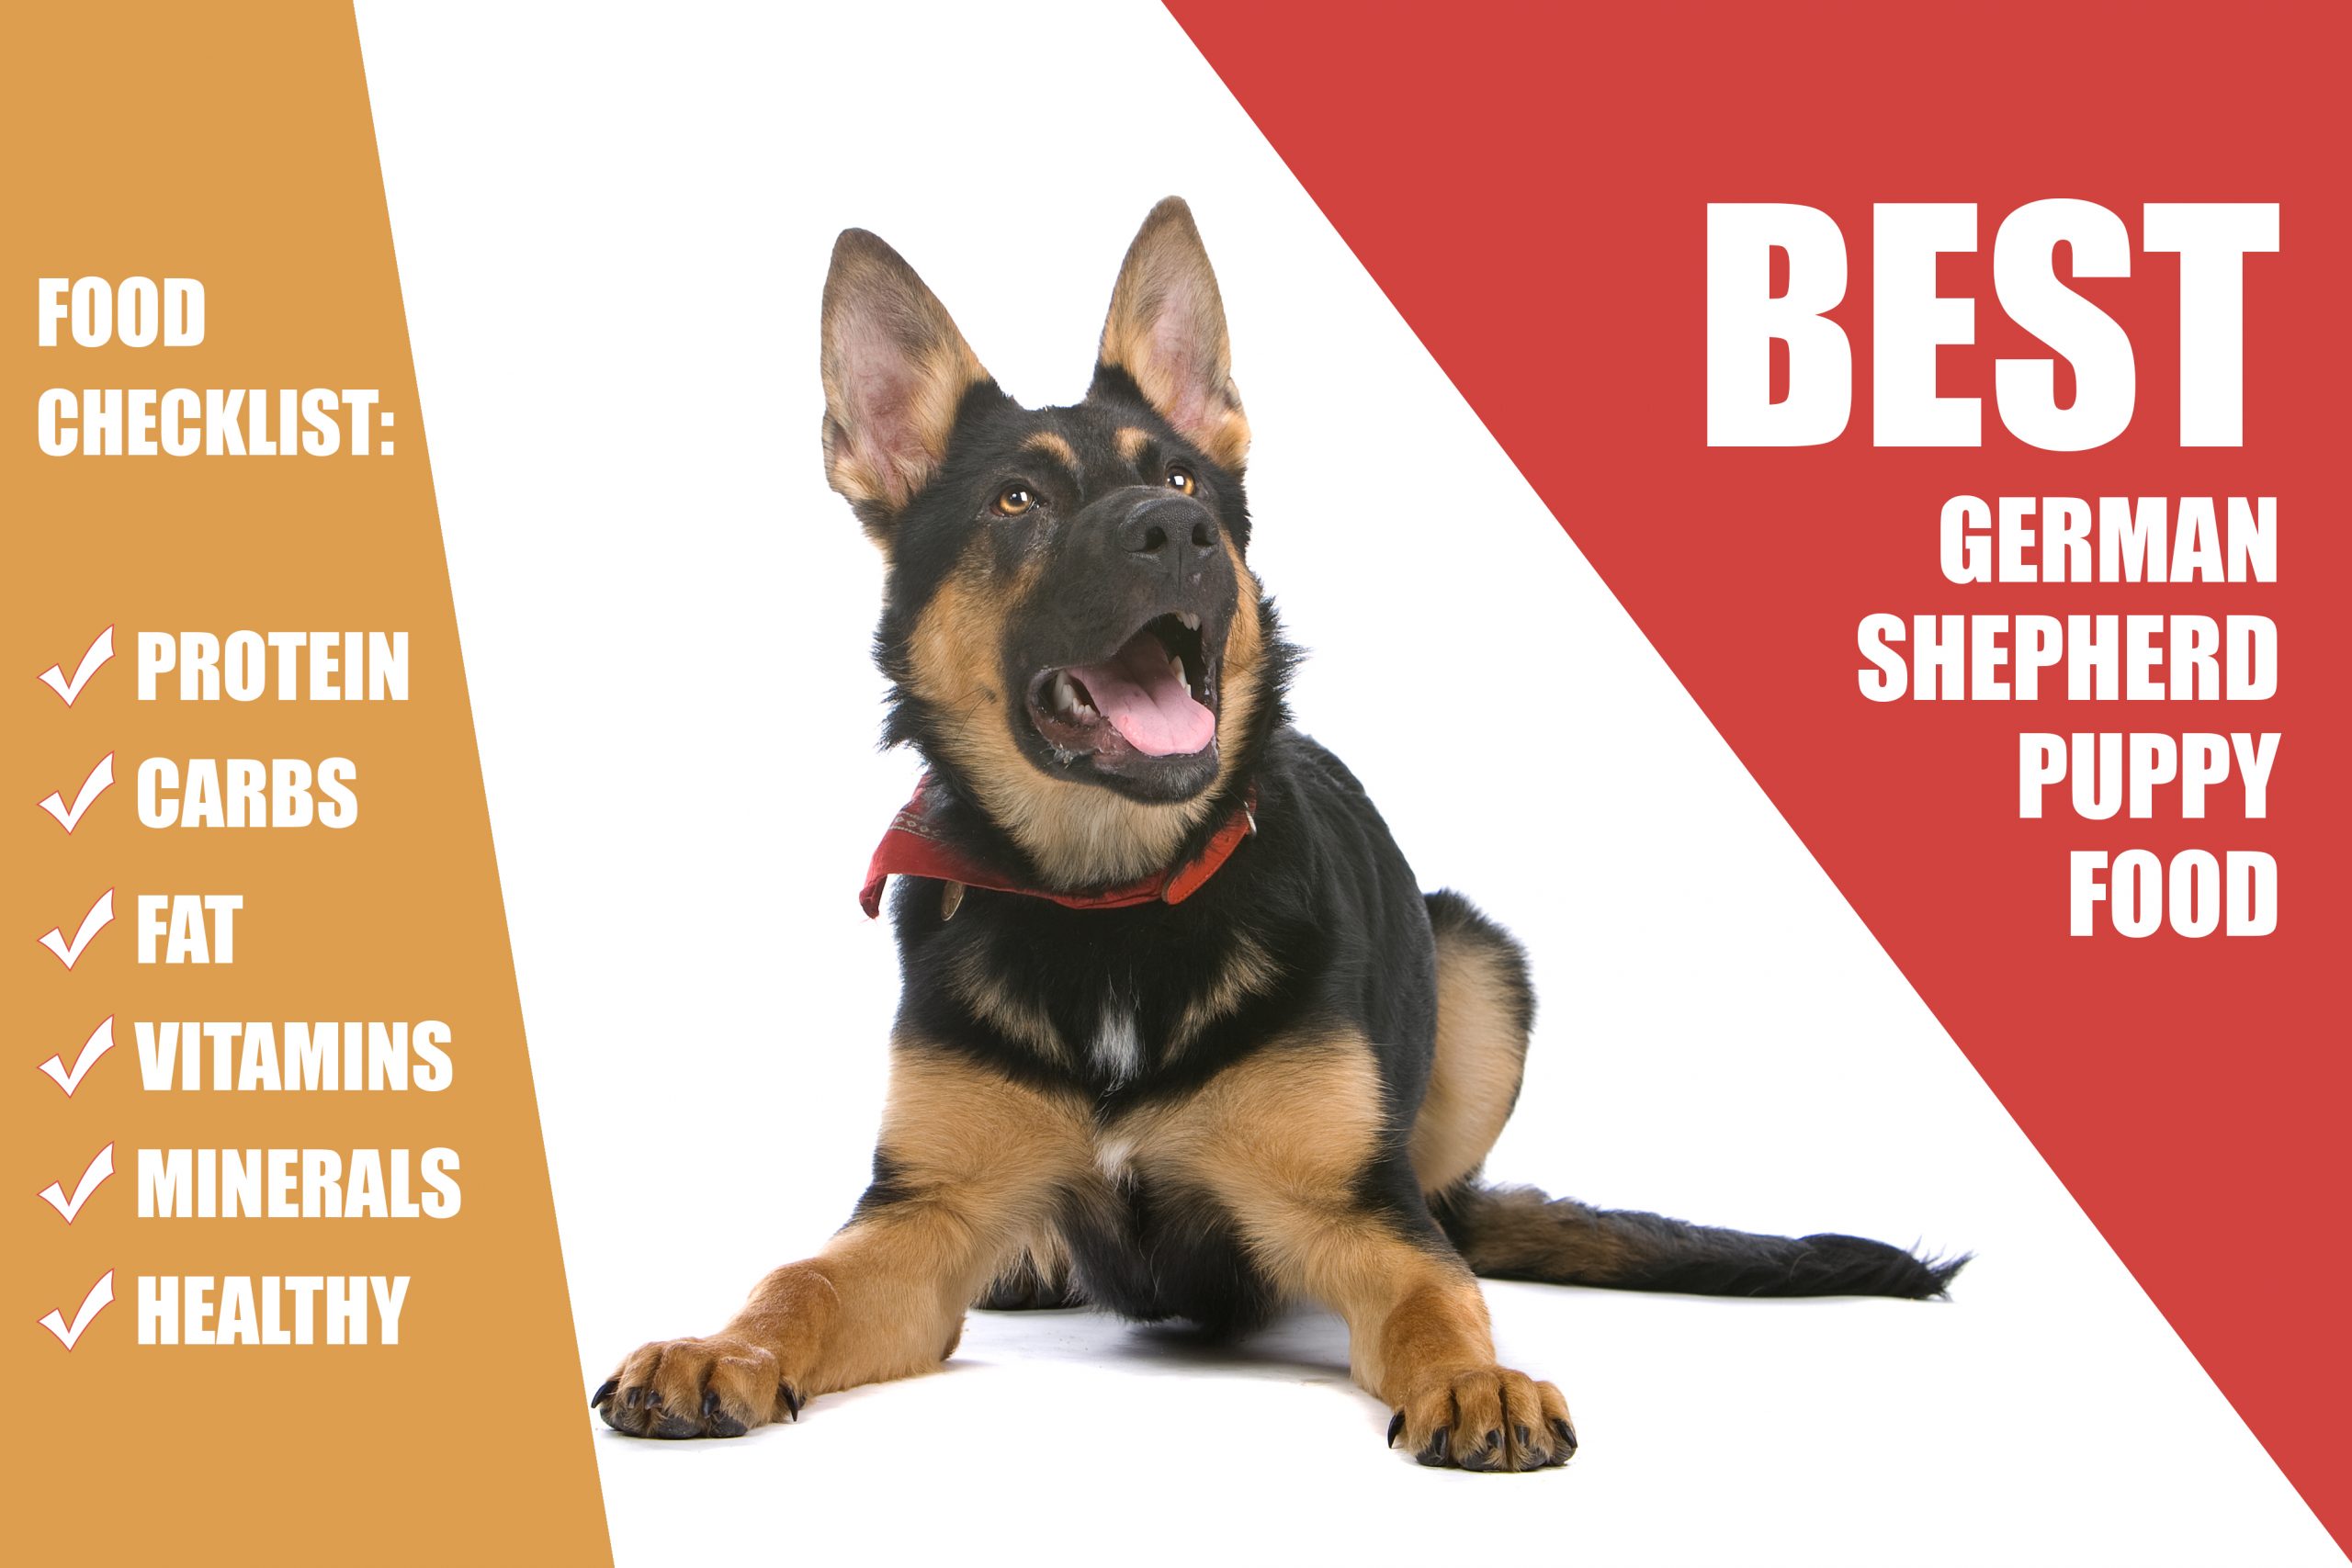 What Is The Best Food For Your German Shepherd Puppy?